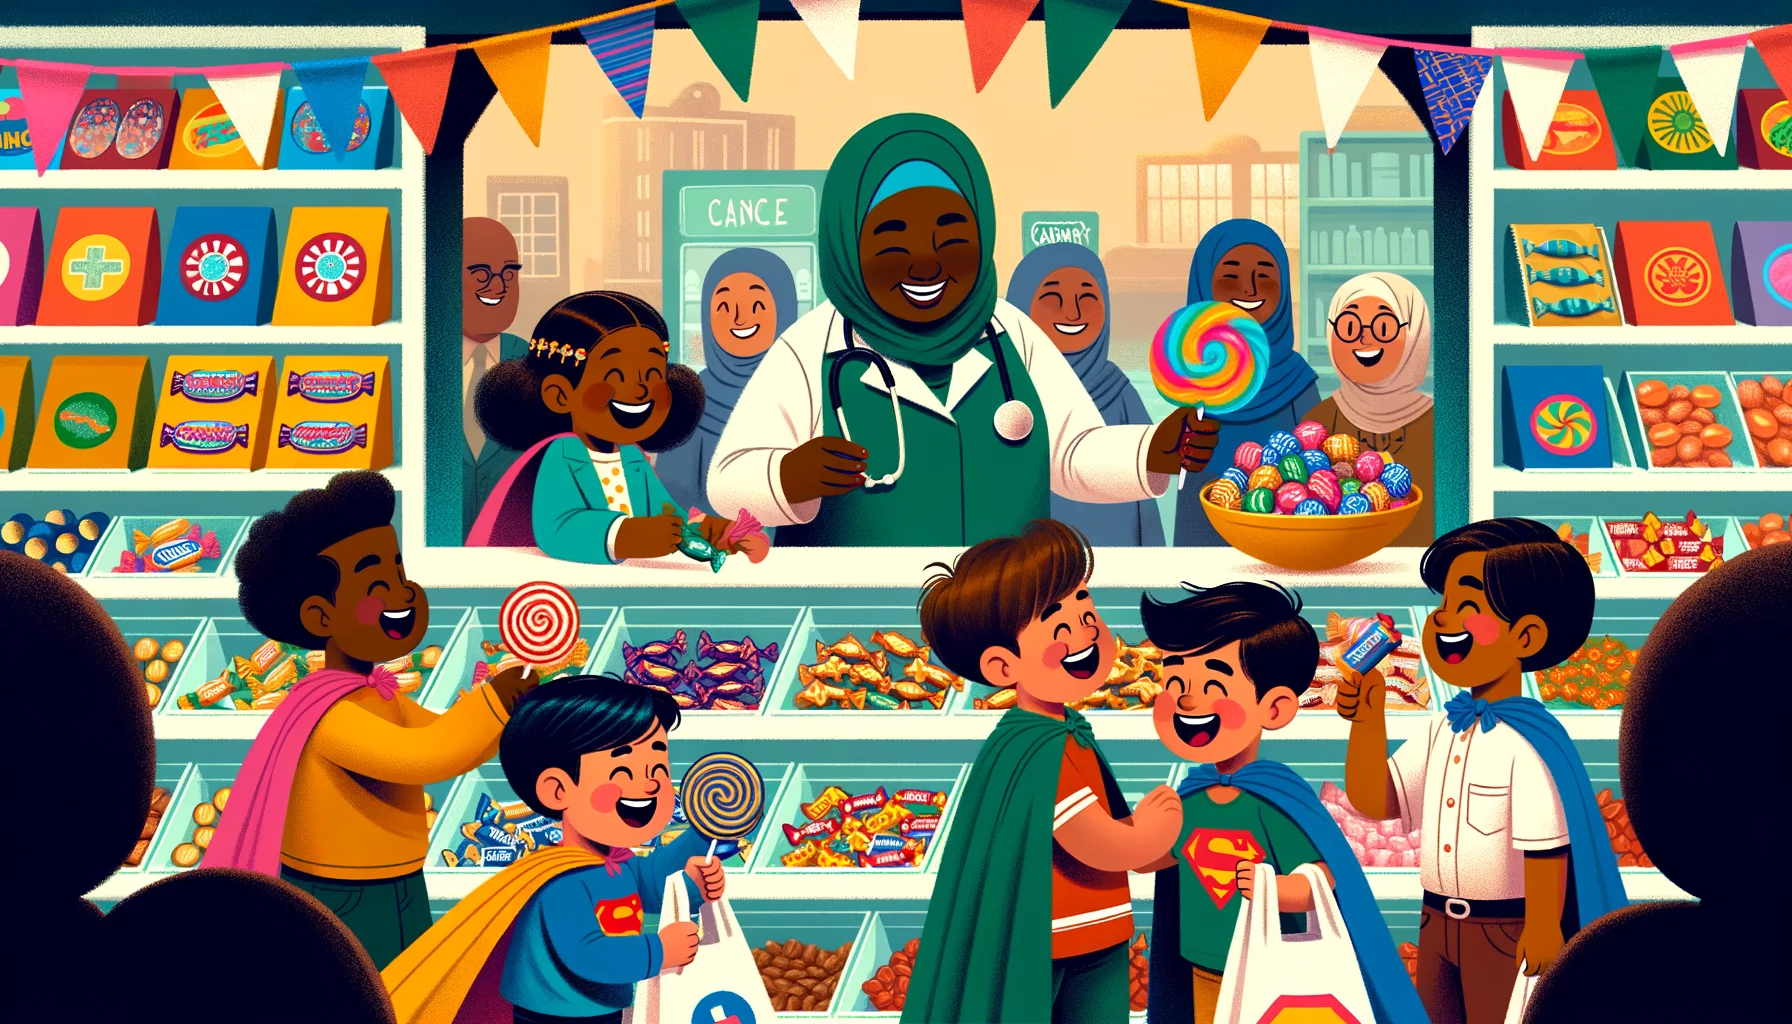 Picture a heartwarming and humorous scene at a candy store. A shelf is filled with an assortment of colorful candies, with a playful sign above it that reads 'Candy for Cancer Patients'. In front of the shelf stands a Black female nurse, she is handing out candies to children in different ethnicities who are wearing superhero capes. A South Asian boy is laughing while holding a rainbow-colored lollipop. A Middle-Eastern girl is grinning as she carries a bag of gummy bears. A Caucasian boy joyfully legs up as he gets a chocolate bar, and a Hispanic girl is giggling while getting her pack of colorful marshmallows.